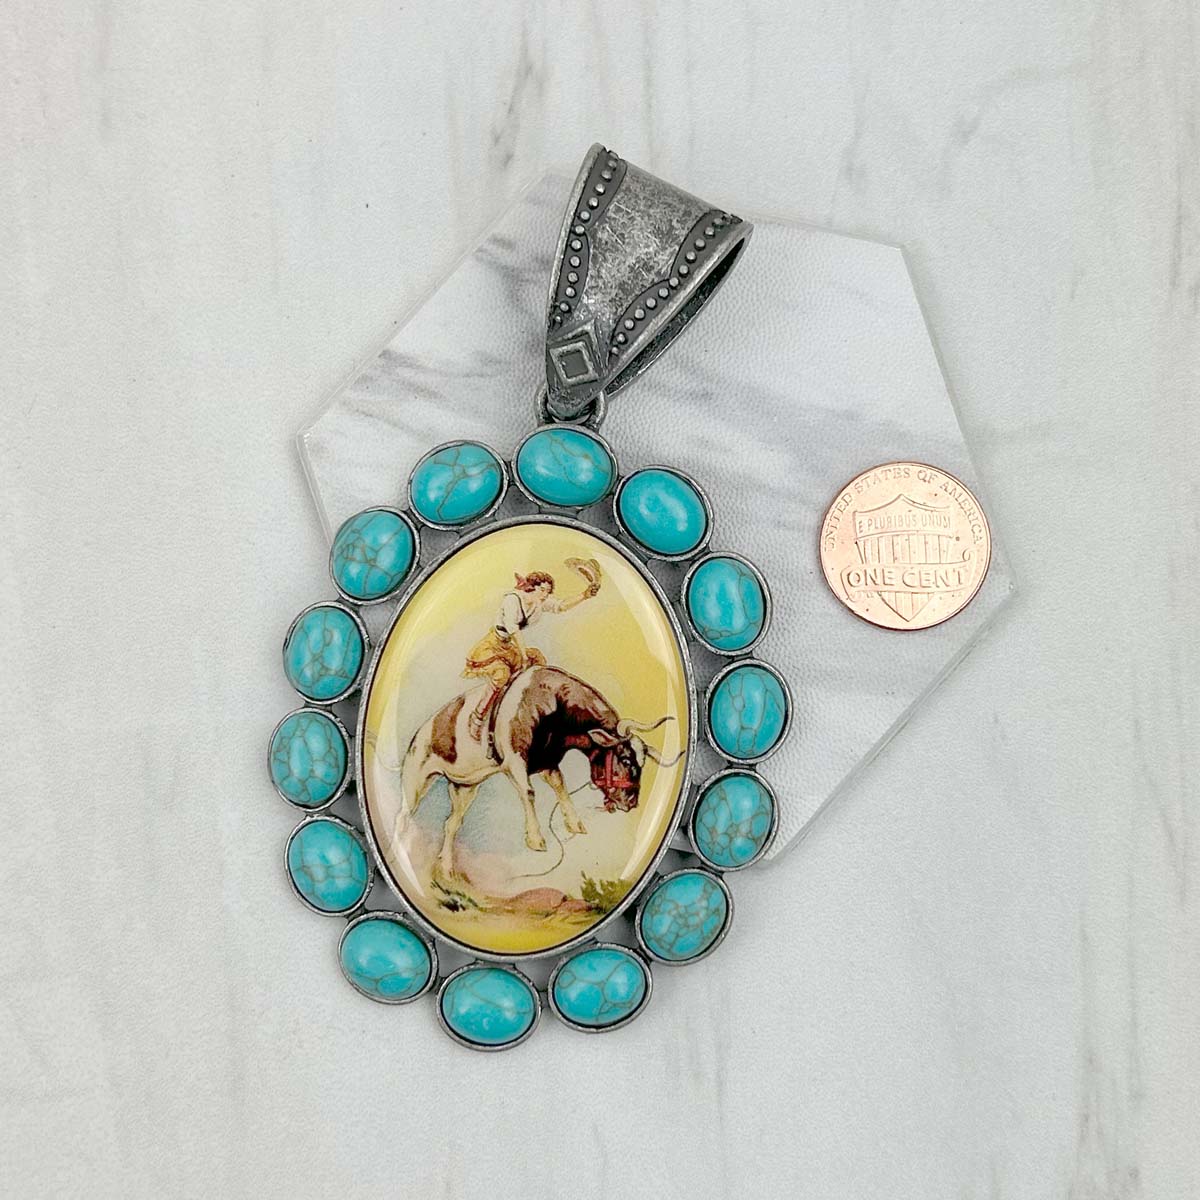 PD231210SL-09                 silver metal with blue turquoise stone oval cowboy Pendent